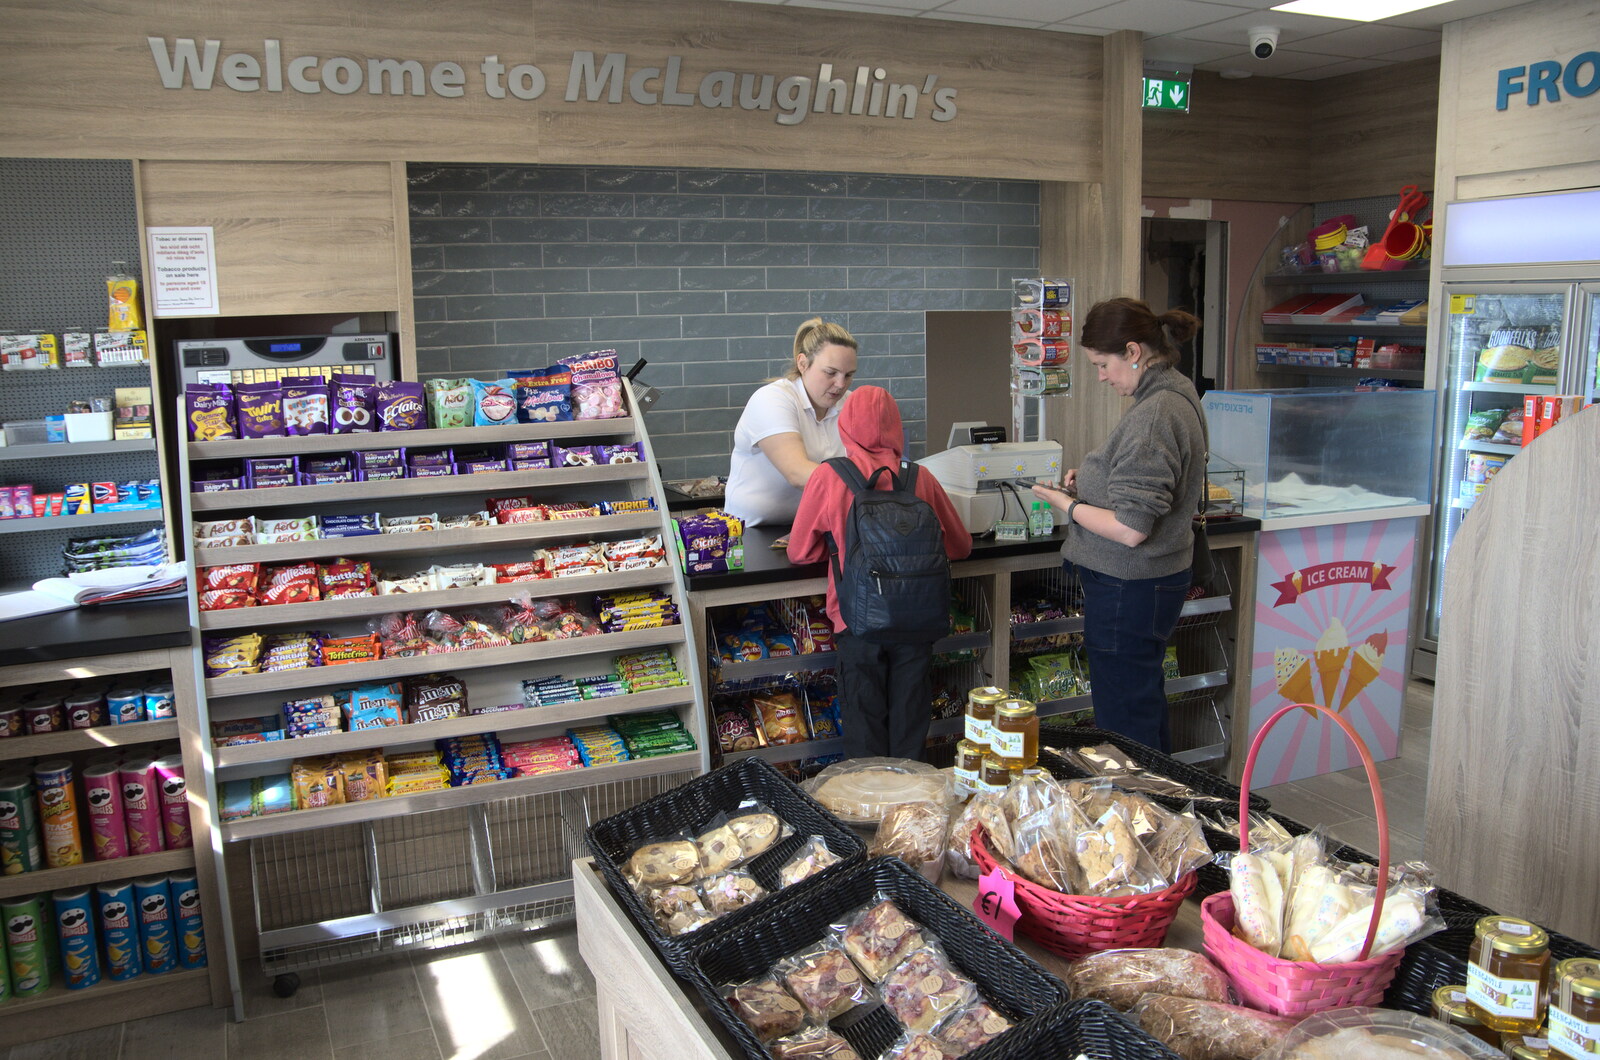 Greencastle, Doagh and Malin Head, County Donegal, Ireland - 19th April 2022: Isobel gets some supplies in Mclaughlin's